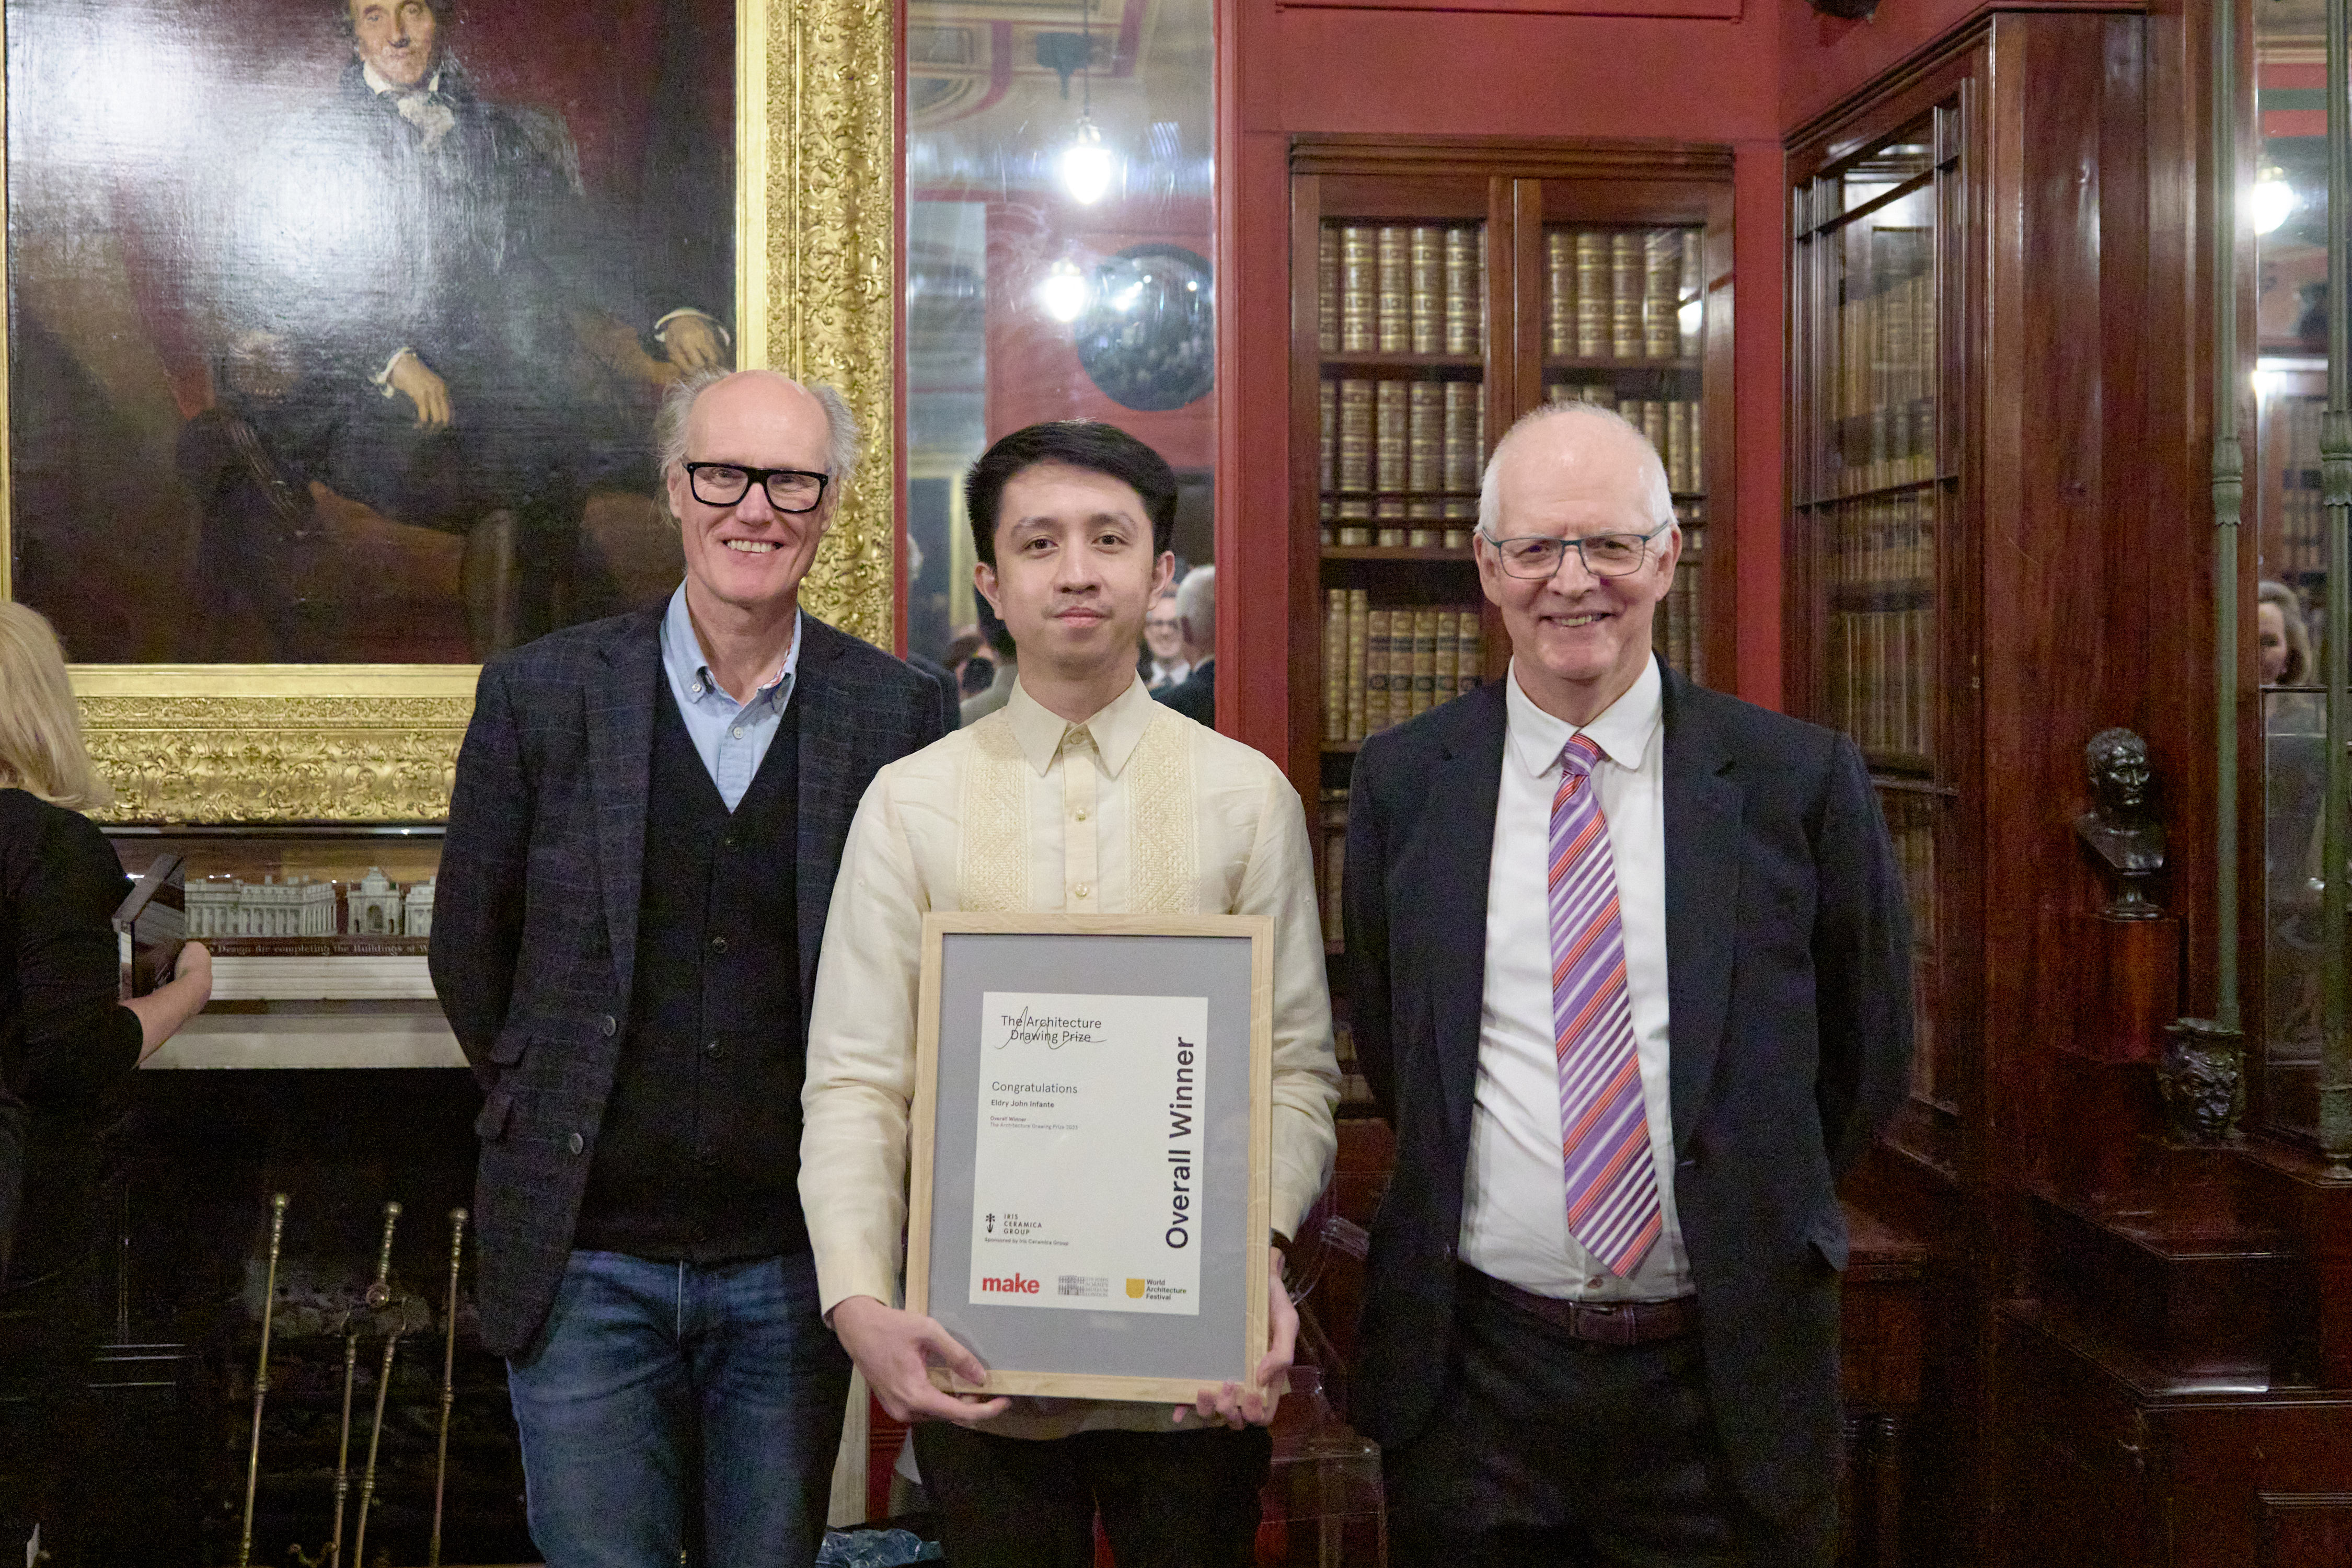 THE ARCHITECTURE DRAWING PRIZE AT THE SIR JOHN SOANE’S MUSEUM IN LONDON